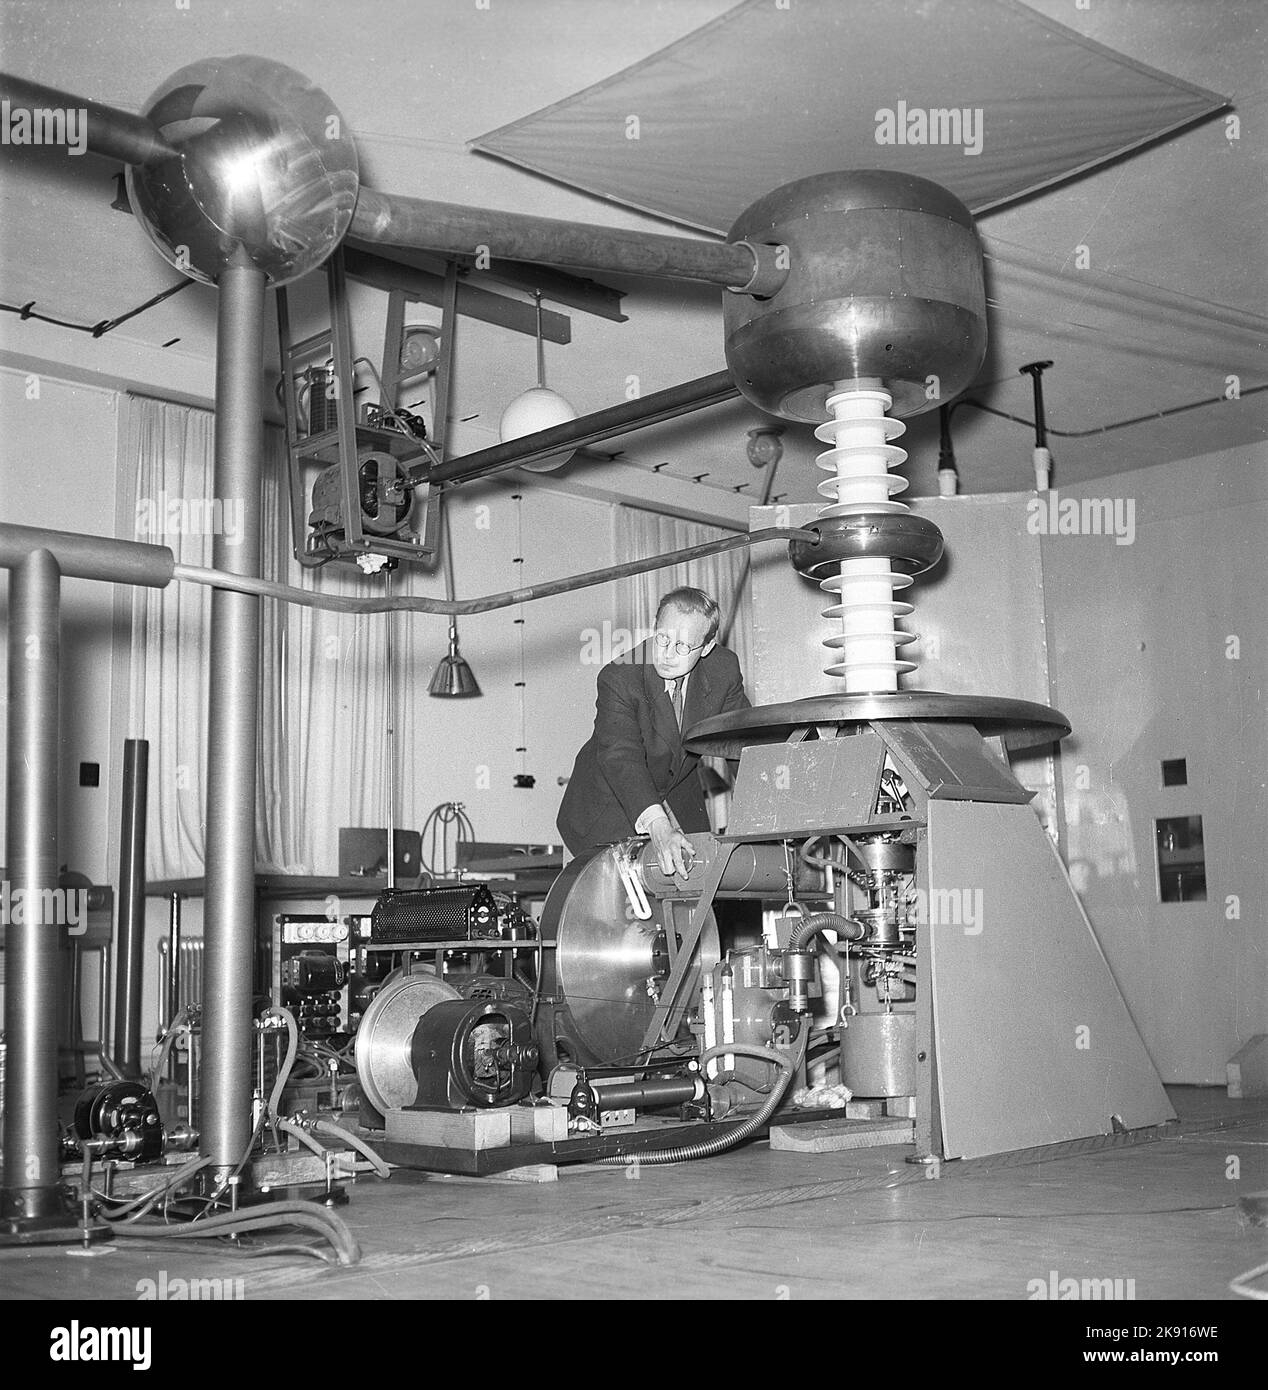 Man and machine in the 1940s. A man is seen in a room with a unusual construction of unknown purpose. Picture taken at KTH Royal institute of Technology. Sweden 1945 Kristoffersson ref P47-4 Stock Photo